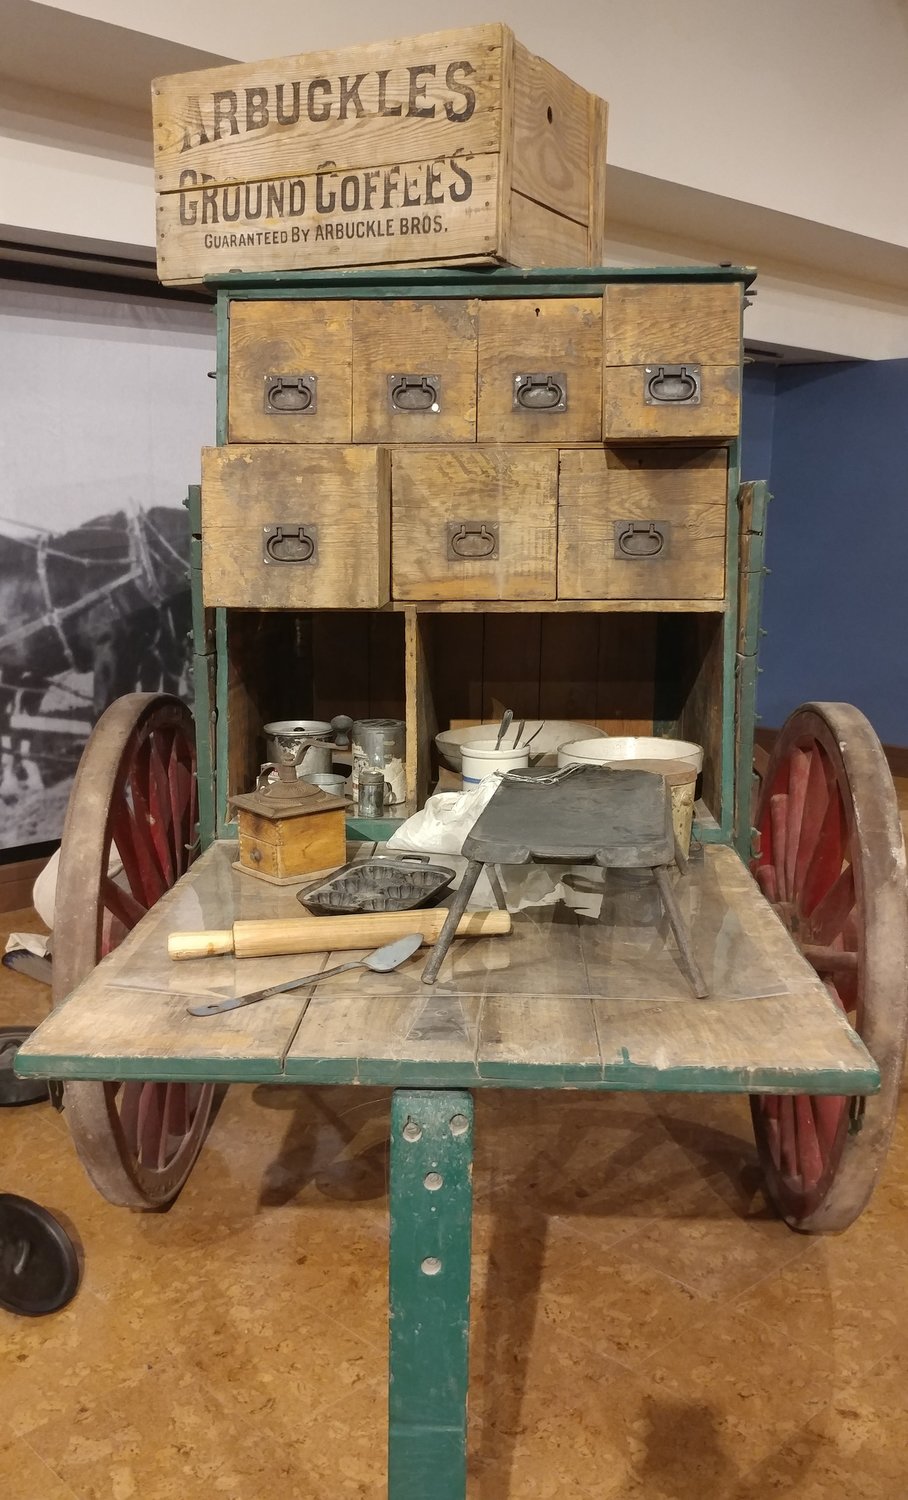 “Rancher Charles Goodnight is credited with inventing the chuckwagon,” according to the text that goes with this exhibit that is part of “Riding Herd.” Goodnight “added a chuck box to a U.S. Army wagon to create a traveling commissary that accompanied cattle drives.”